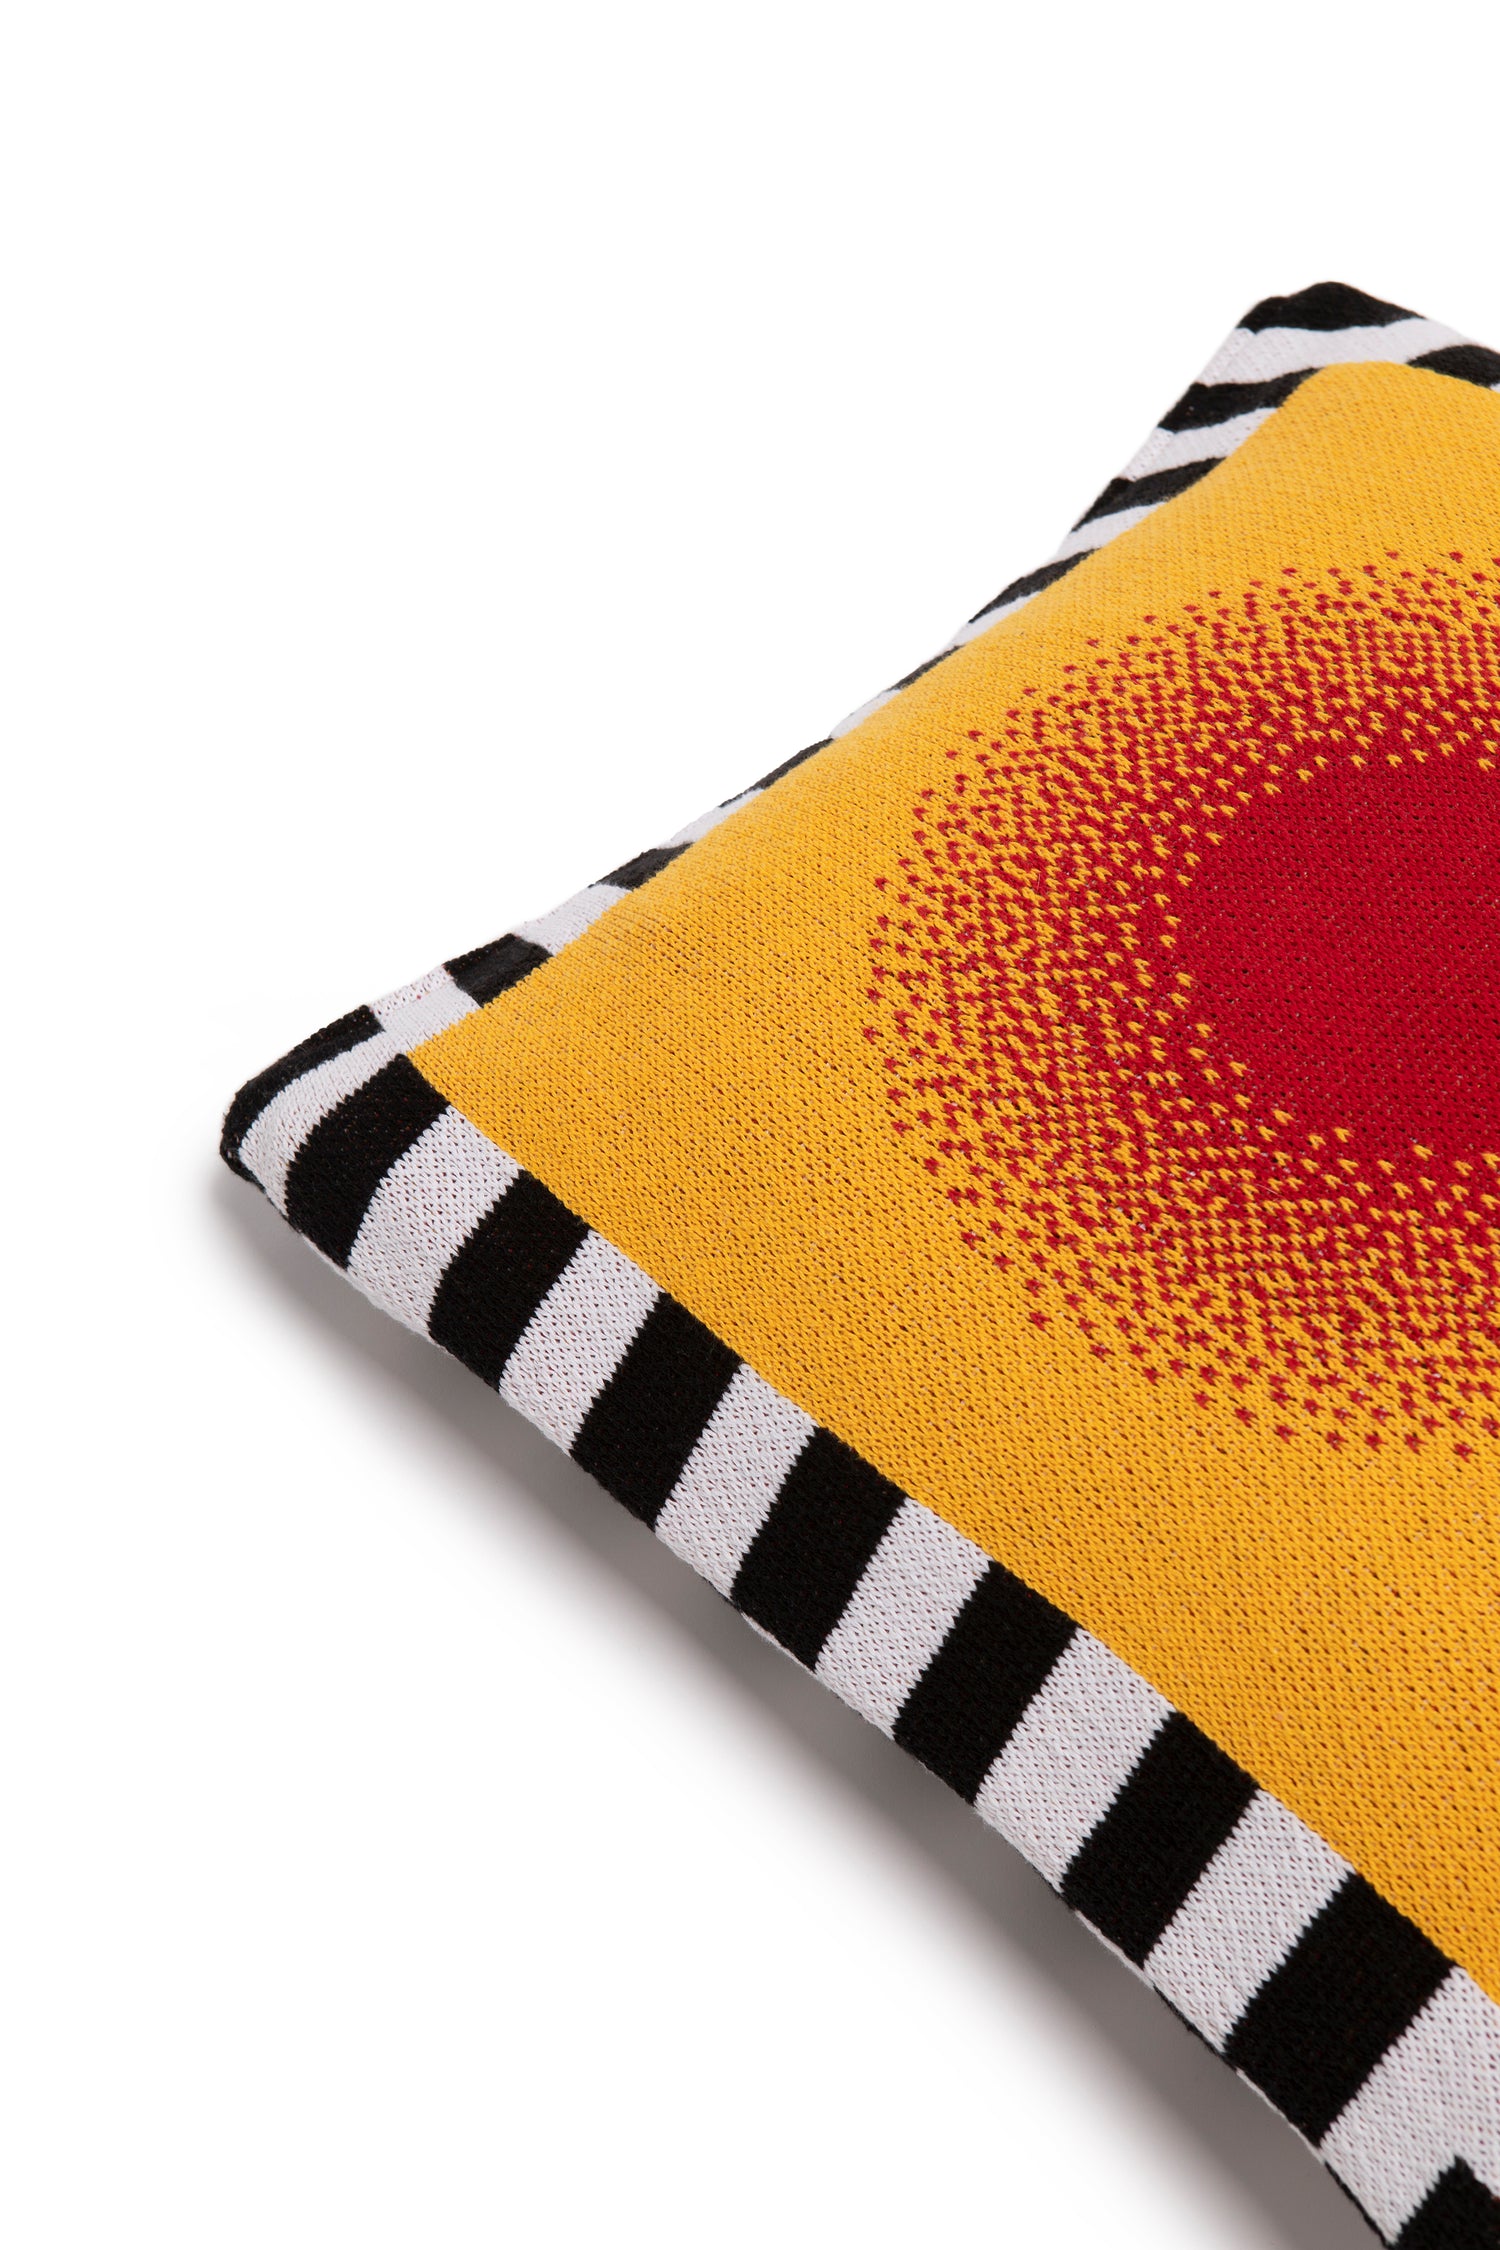 Close up image of burst pillow cover showing the corner of the pillow with the black and white stripe border and a red circle gradually going into a yellow background.